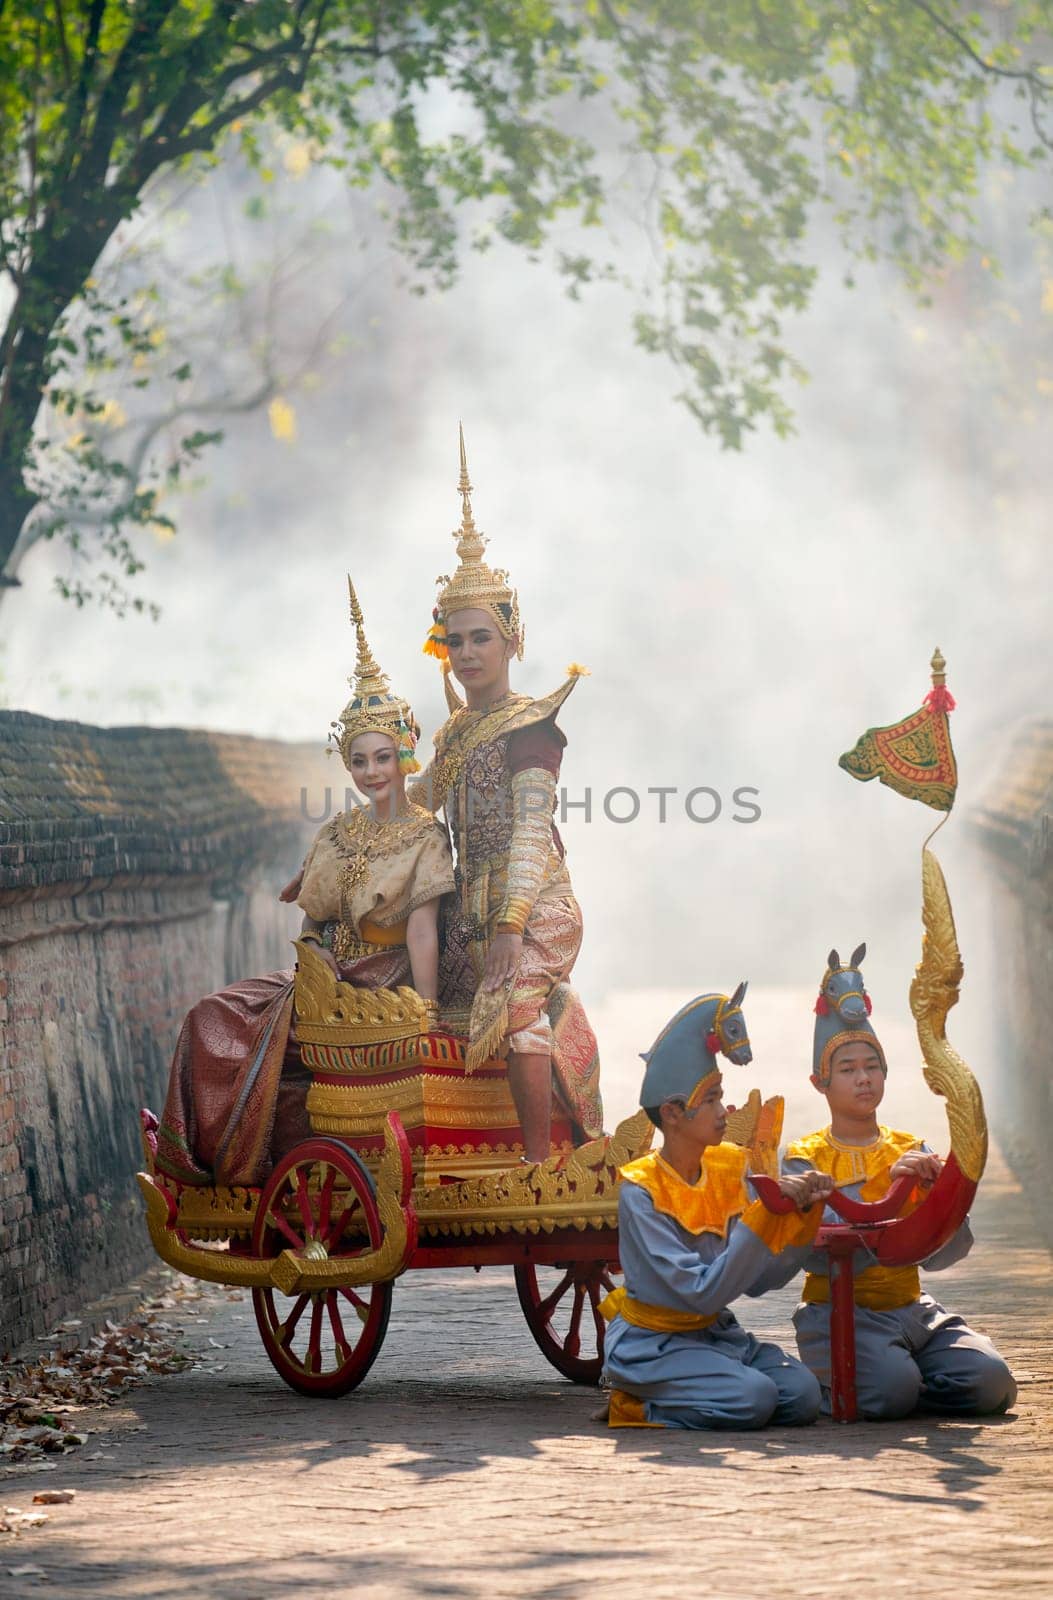 Asian man and woman with Thai old traditional dress stay together on traditional chariot in front of ancient building.